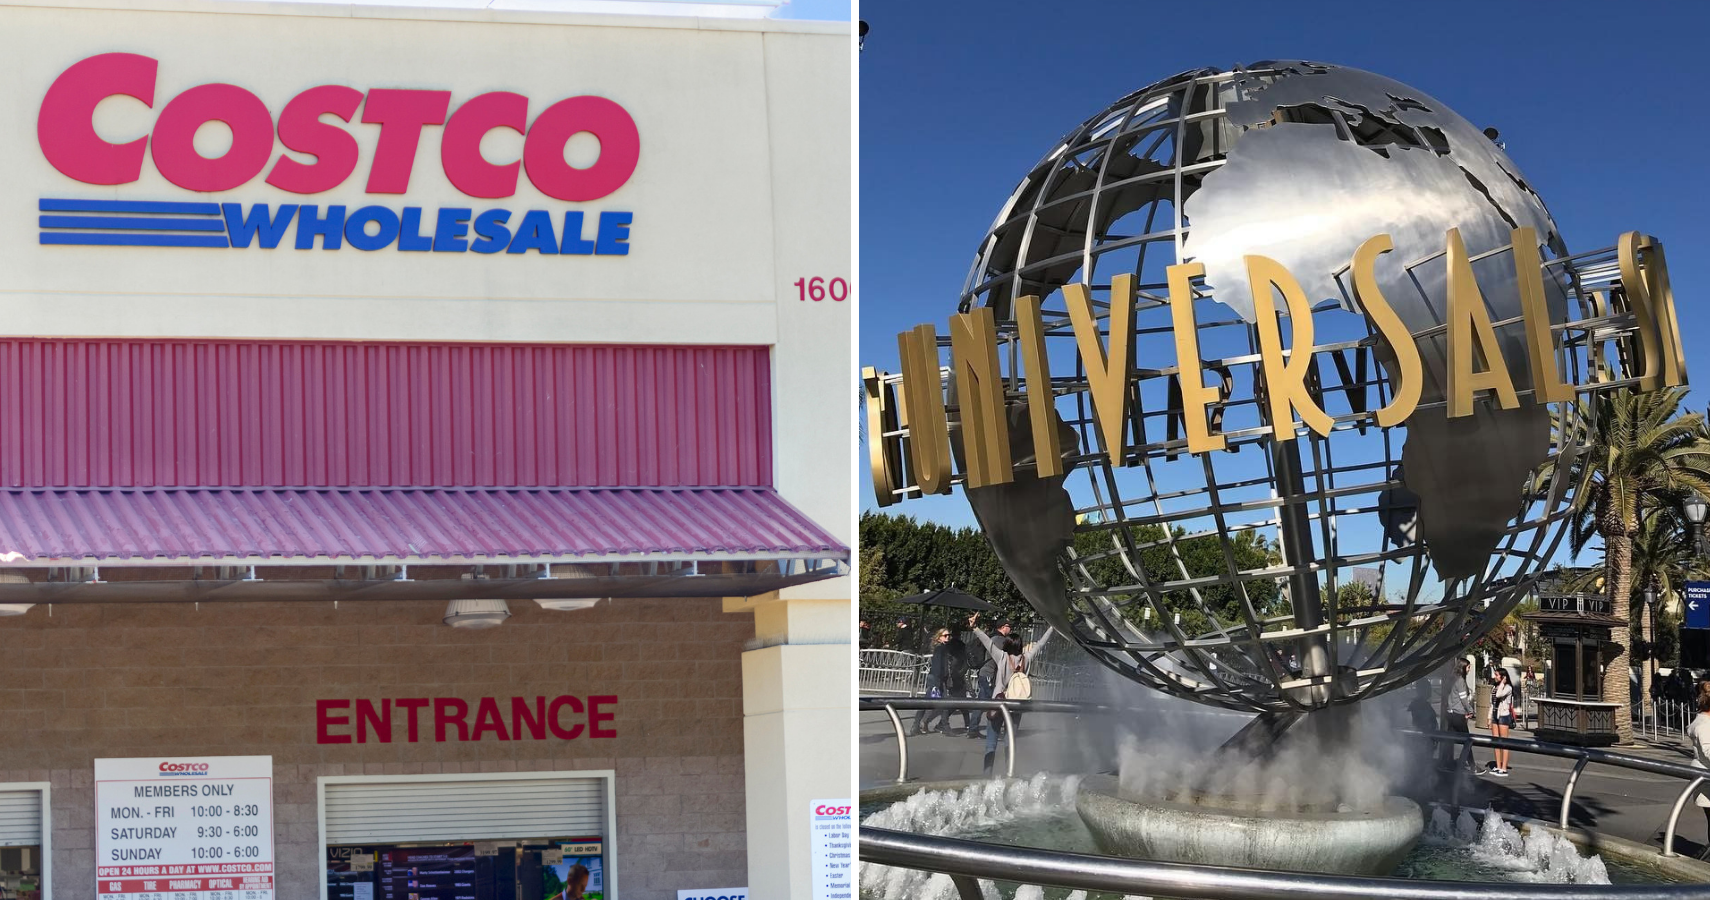 Costco Universal Studio Ticket Deal Price, Restrictions, Blackout Dates